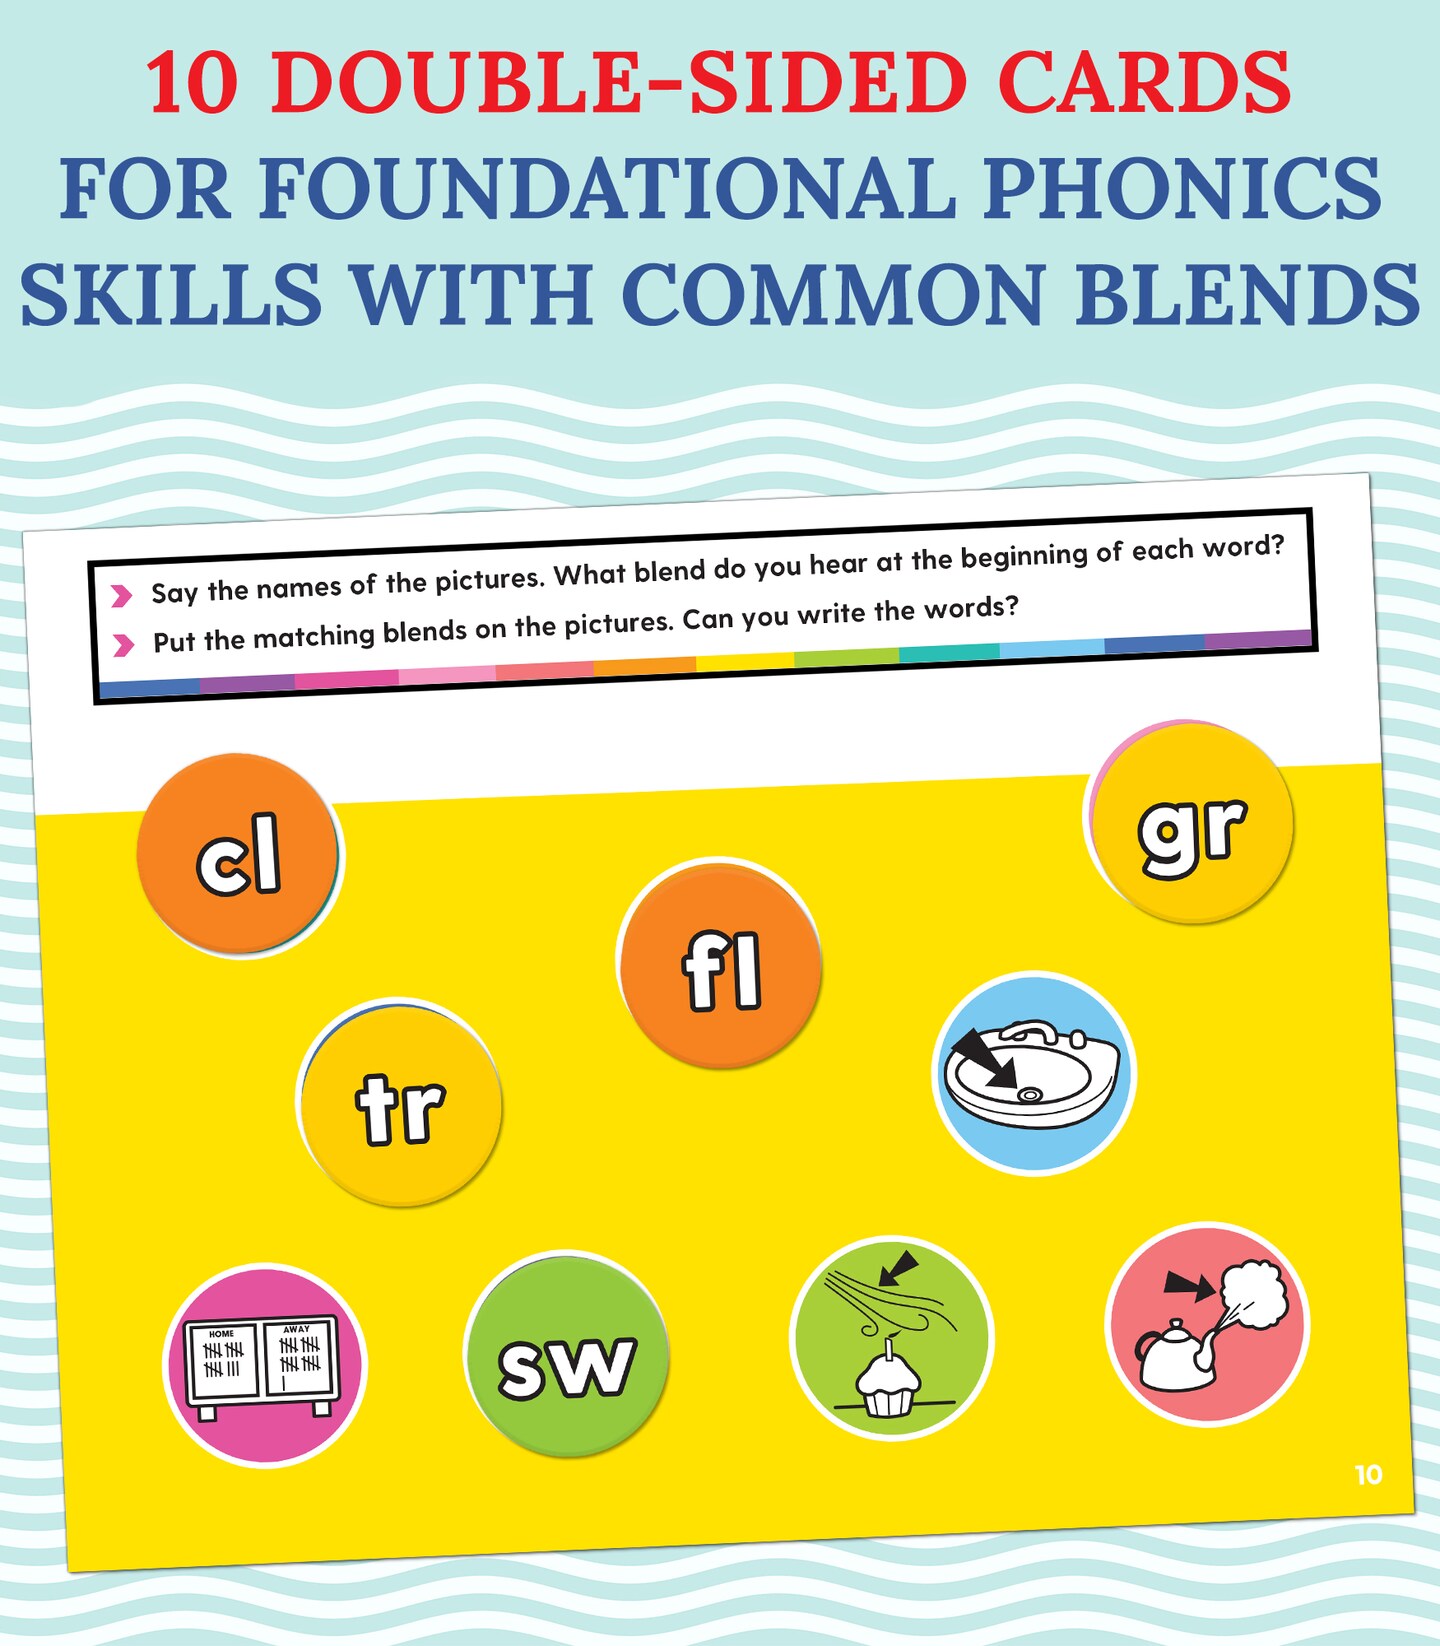 Carson Dellosa Edu-Clings Silicone Center Beginning and Ending Blends Manipulative&#x2014;Grades 1-2 Dry-Erase Mats and Phonics Manipulatives With Common Blends, Language Arts Skills (25 pc)